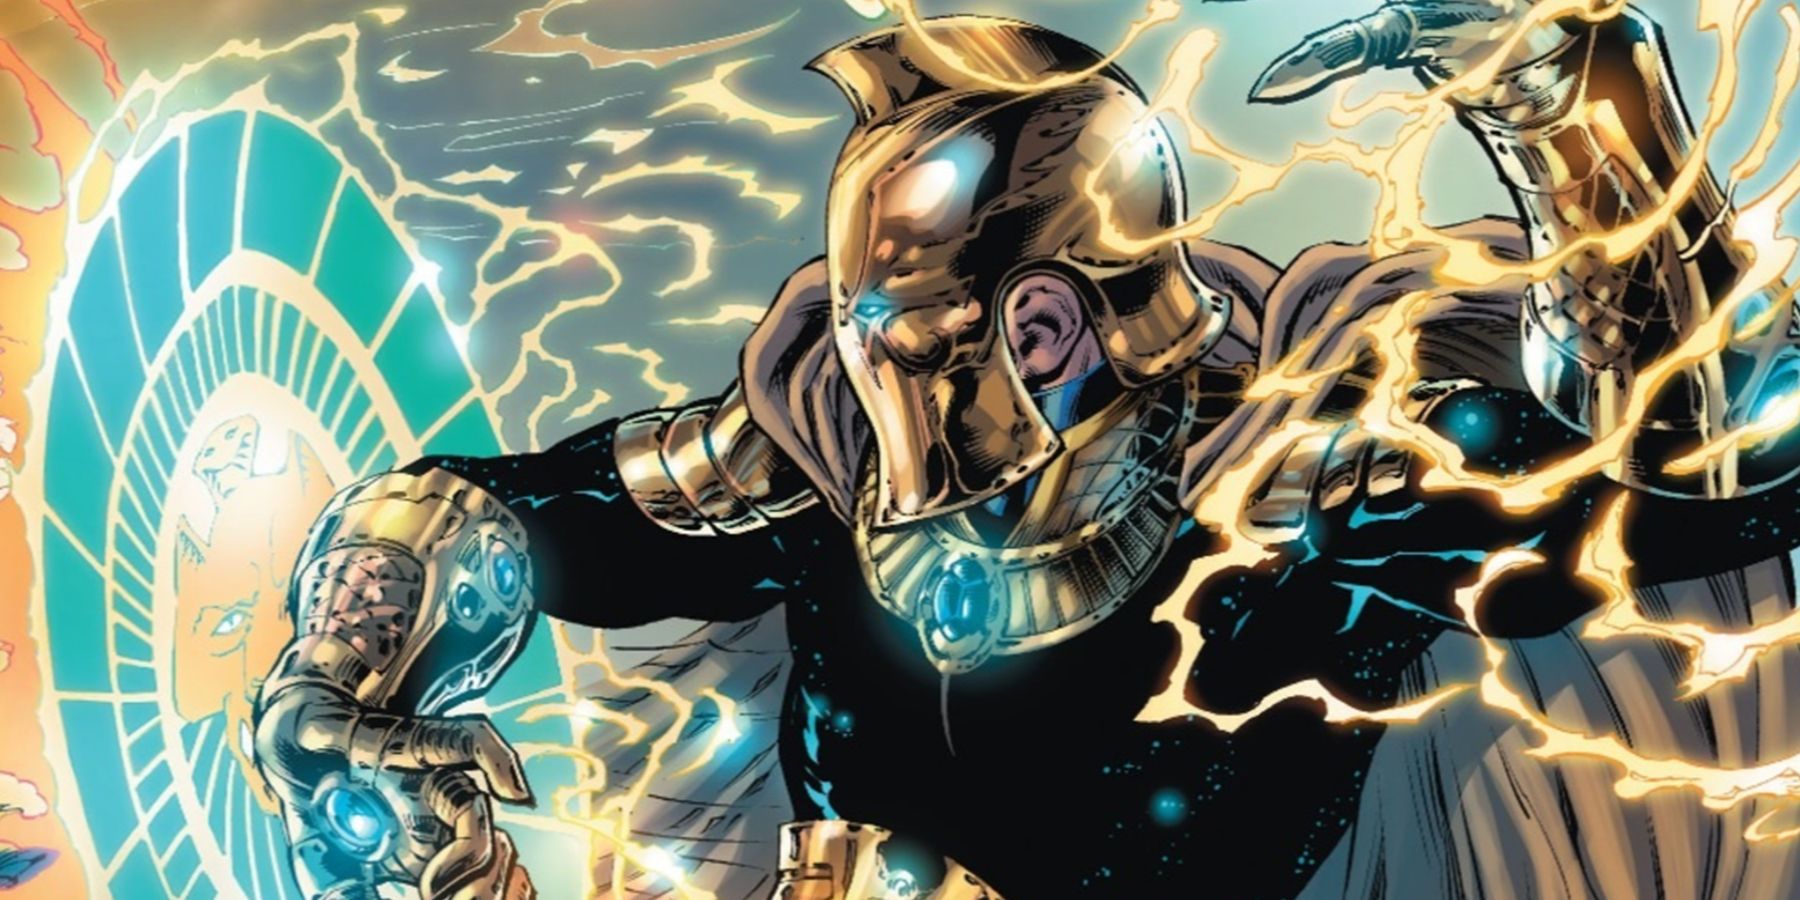 Doctor Fate using his powers in DC comics